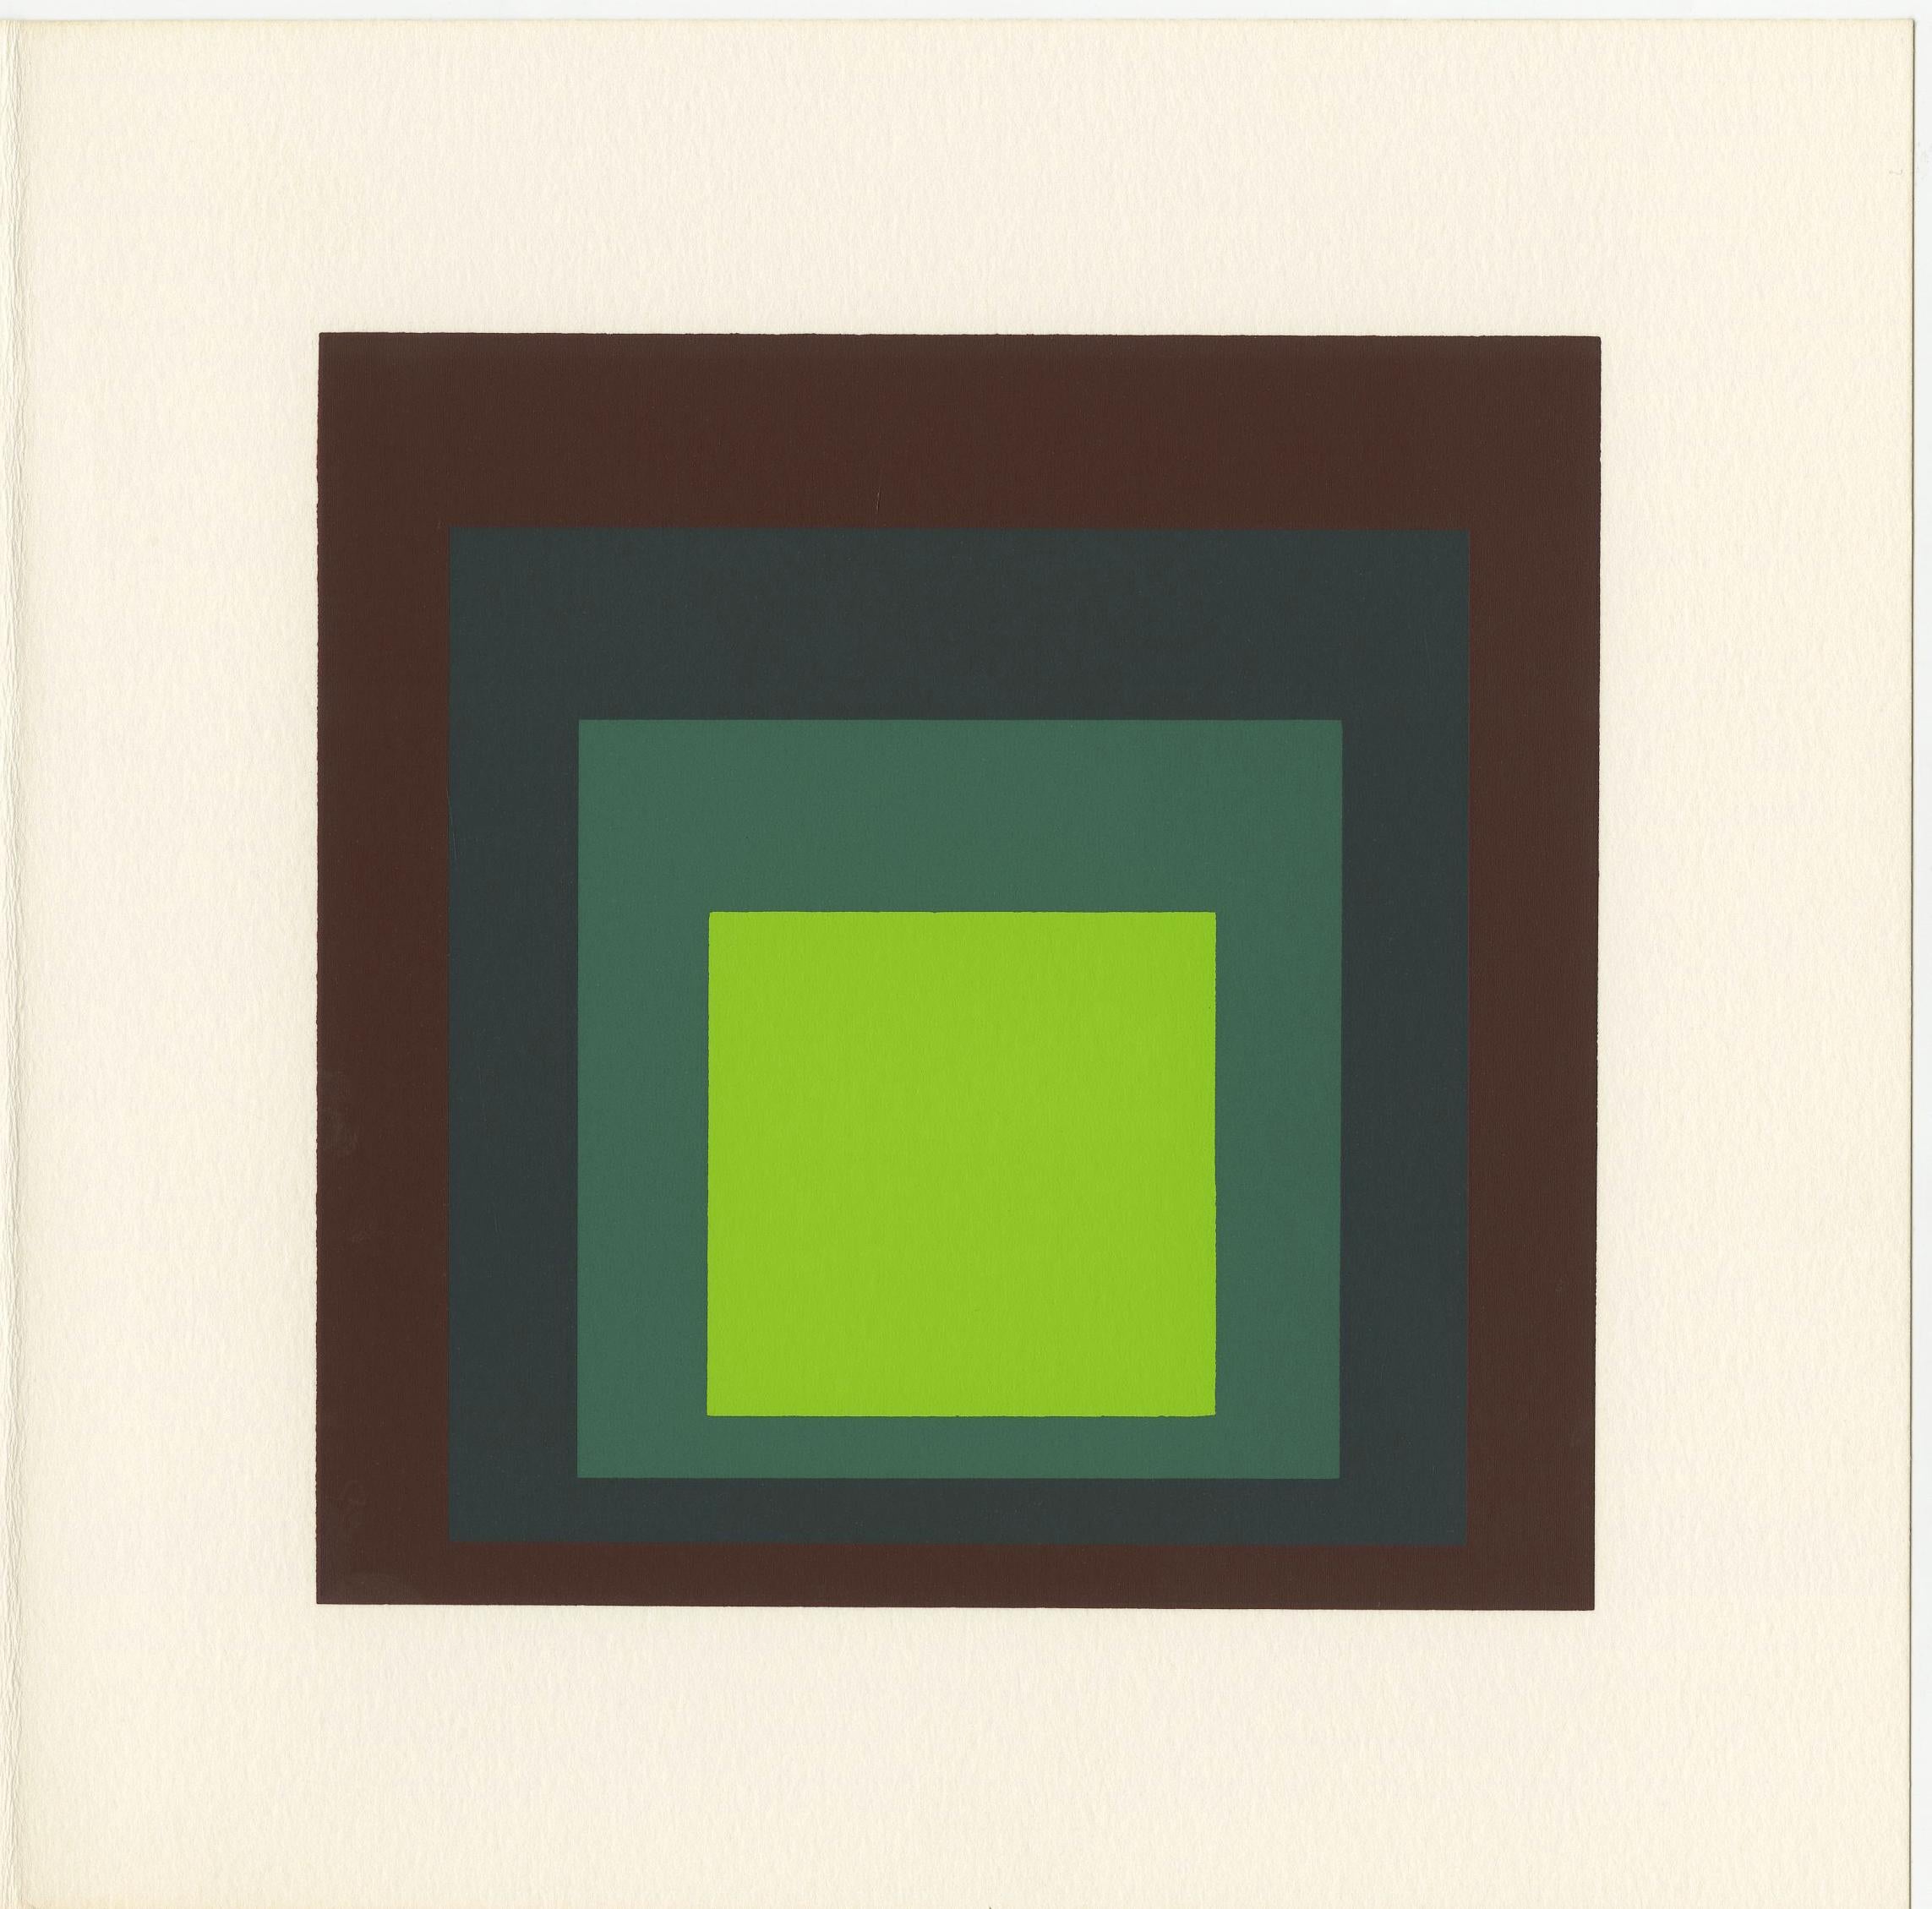 Prospectus for publication of I-S k - Print by (after) Josef Albers